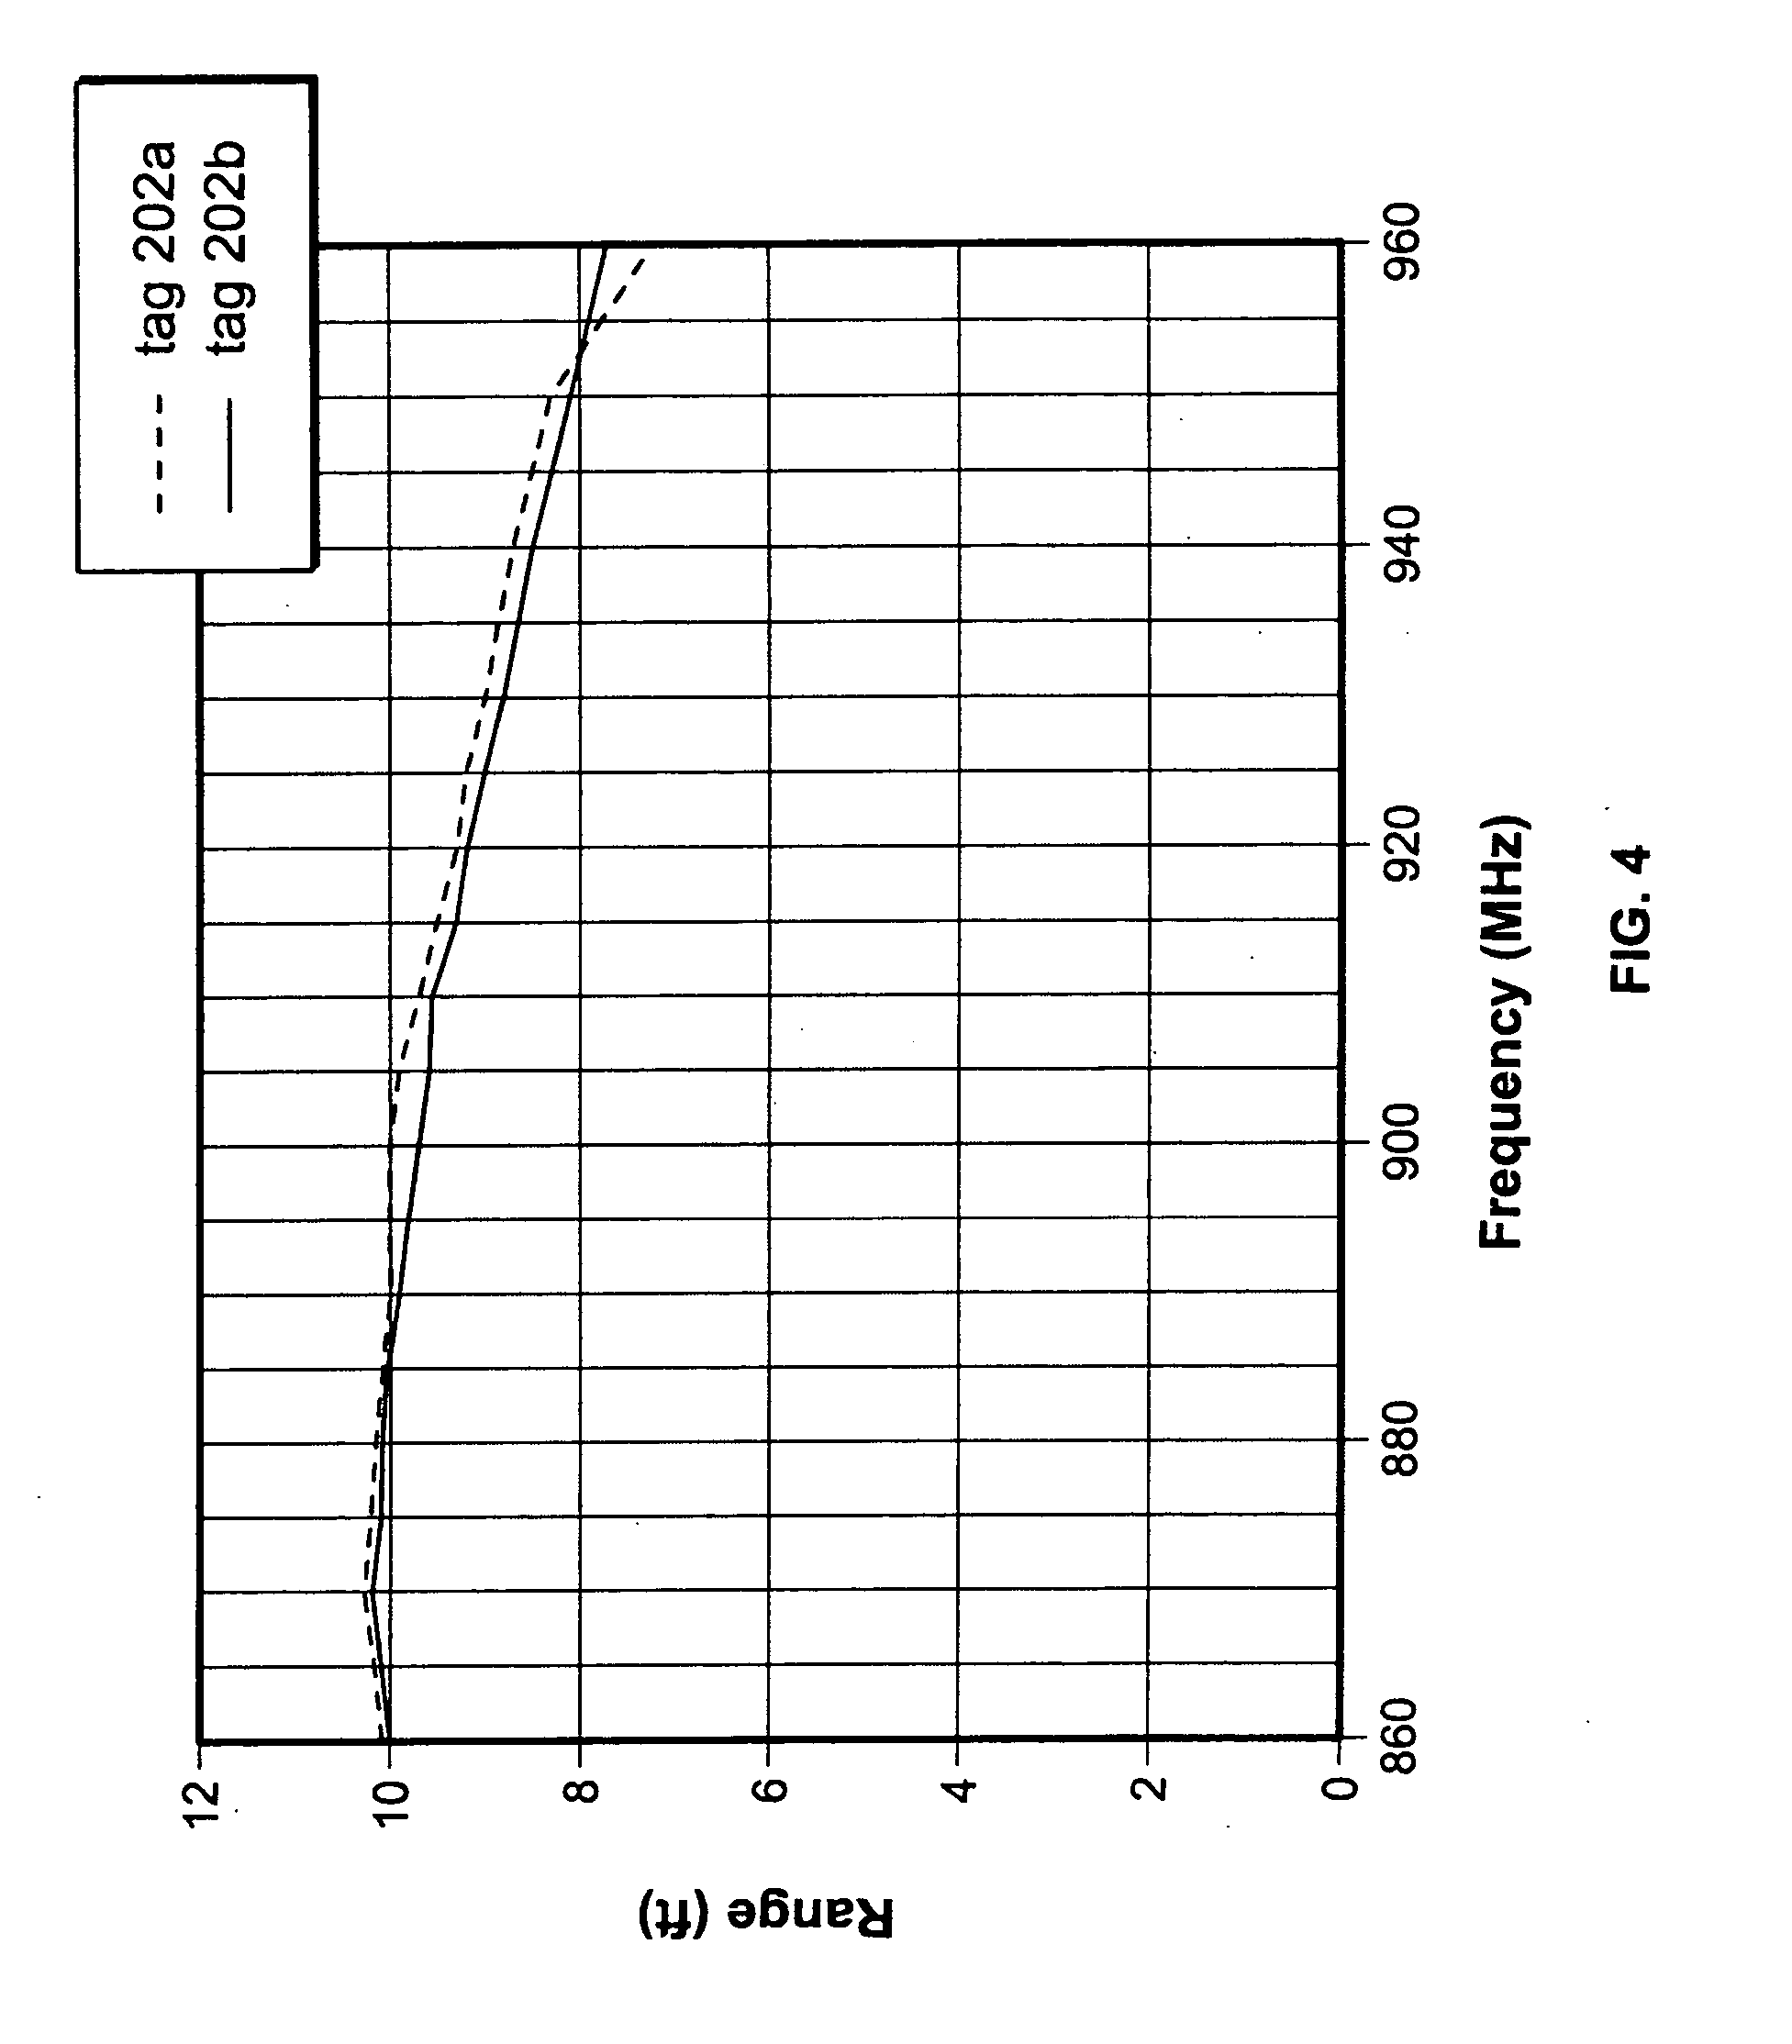 RFID tag with antenna comprising optical code or symbol